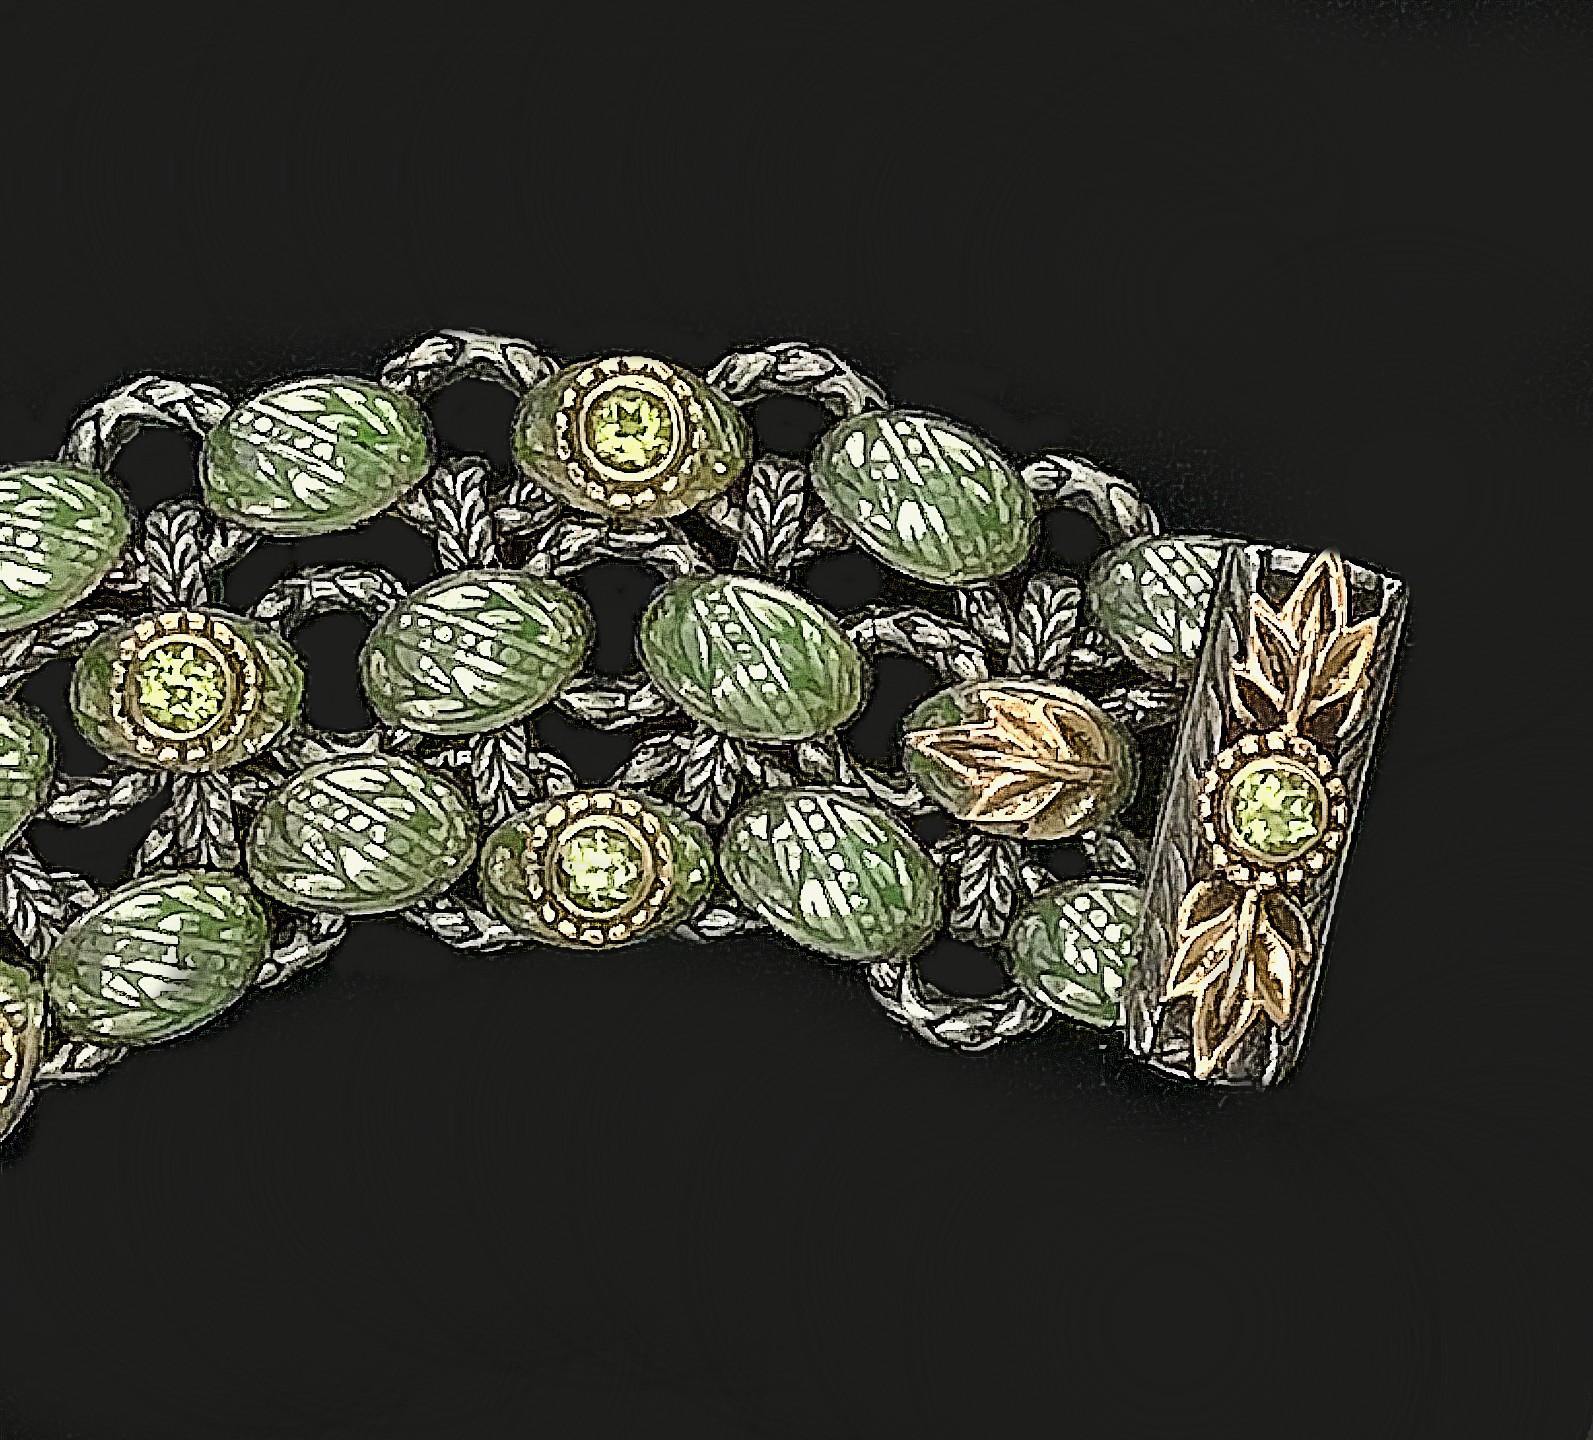 Sterling silver and 18k yellow gold engraved bracelet featuring twelve round faceted fine Peridot,  accented with Peridot vitreous enamel. The bracelet is fastened by a 